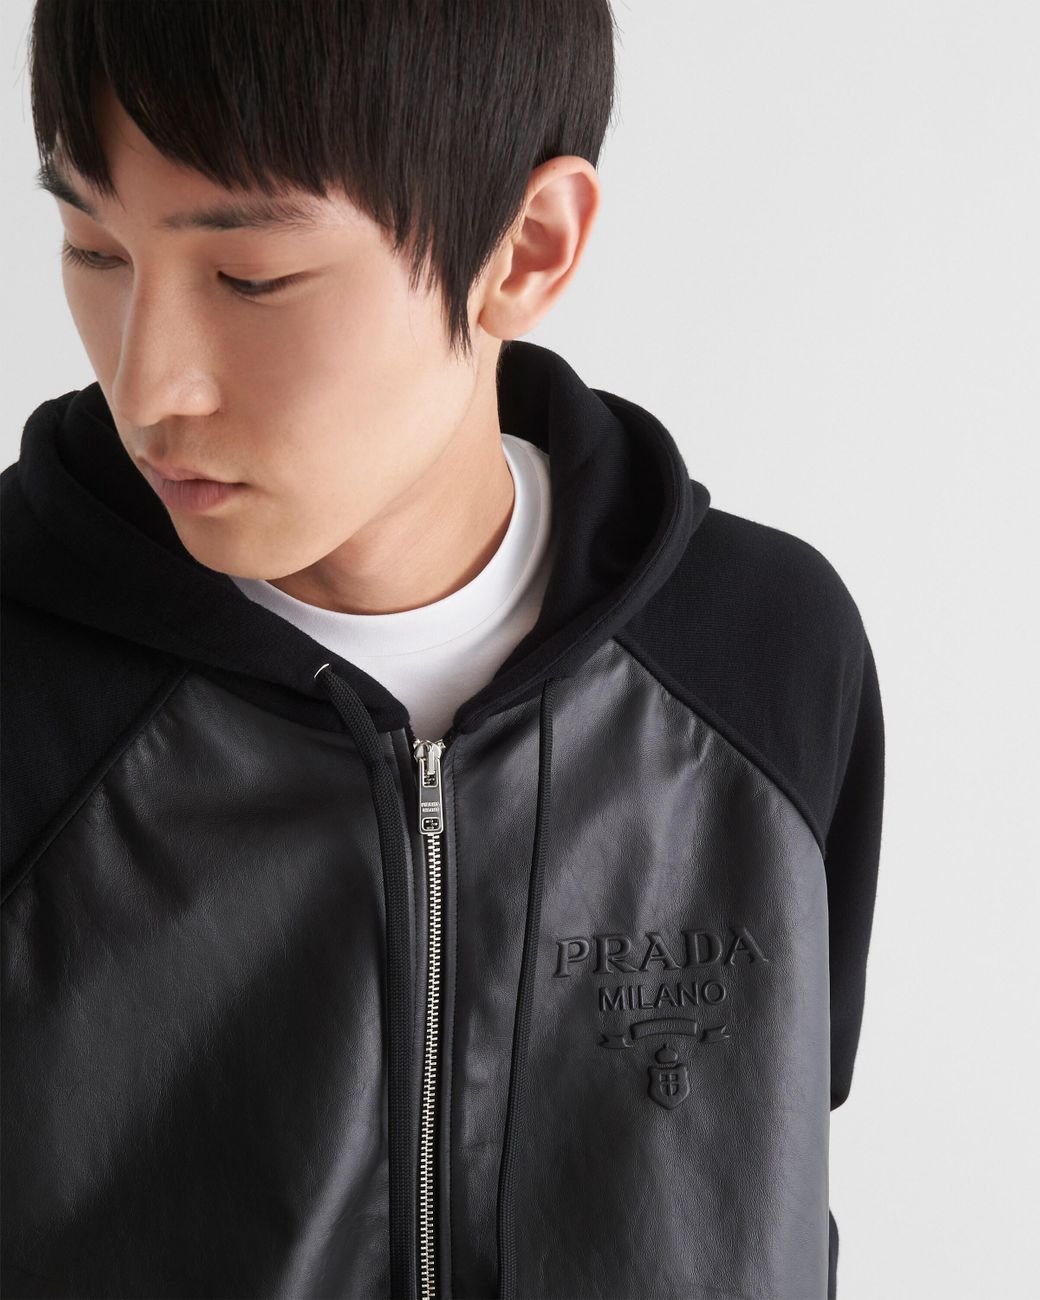 Prada Technical Fleece And Leather Hoodie Jacket in Black for Men | Lyst